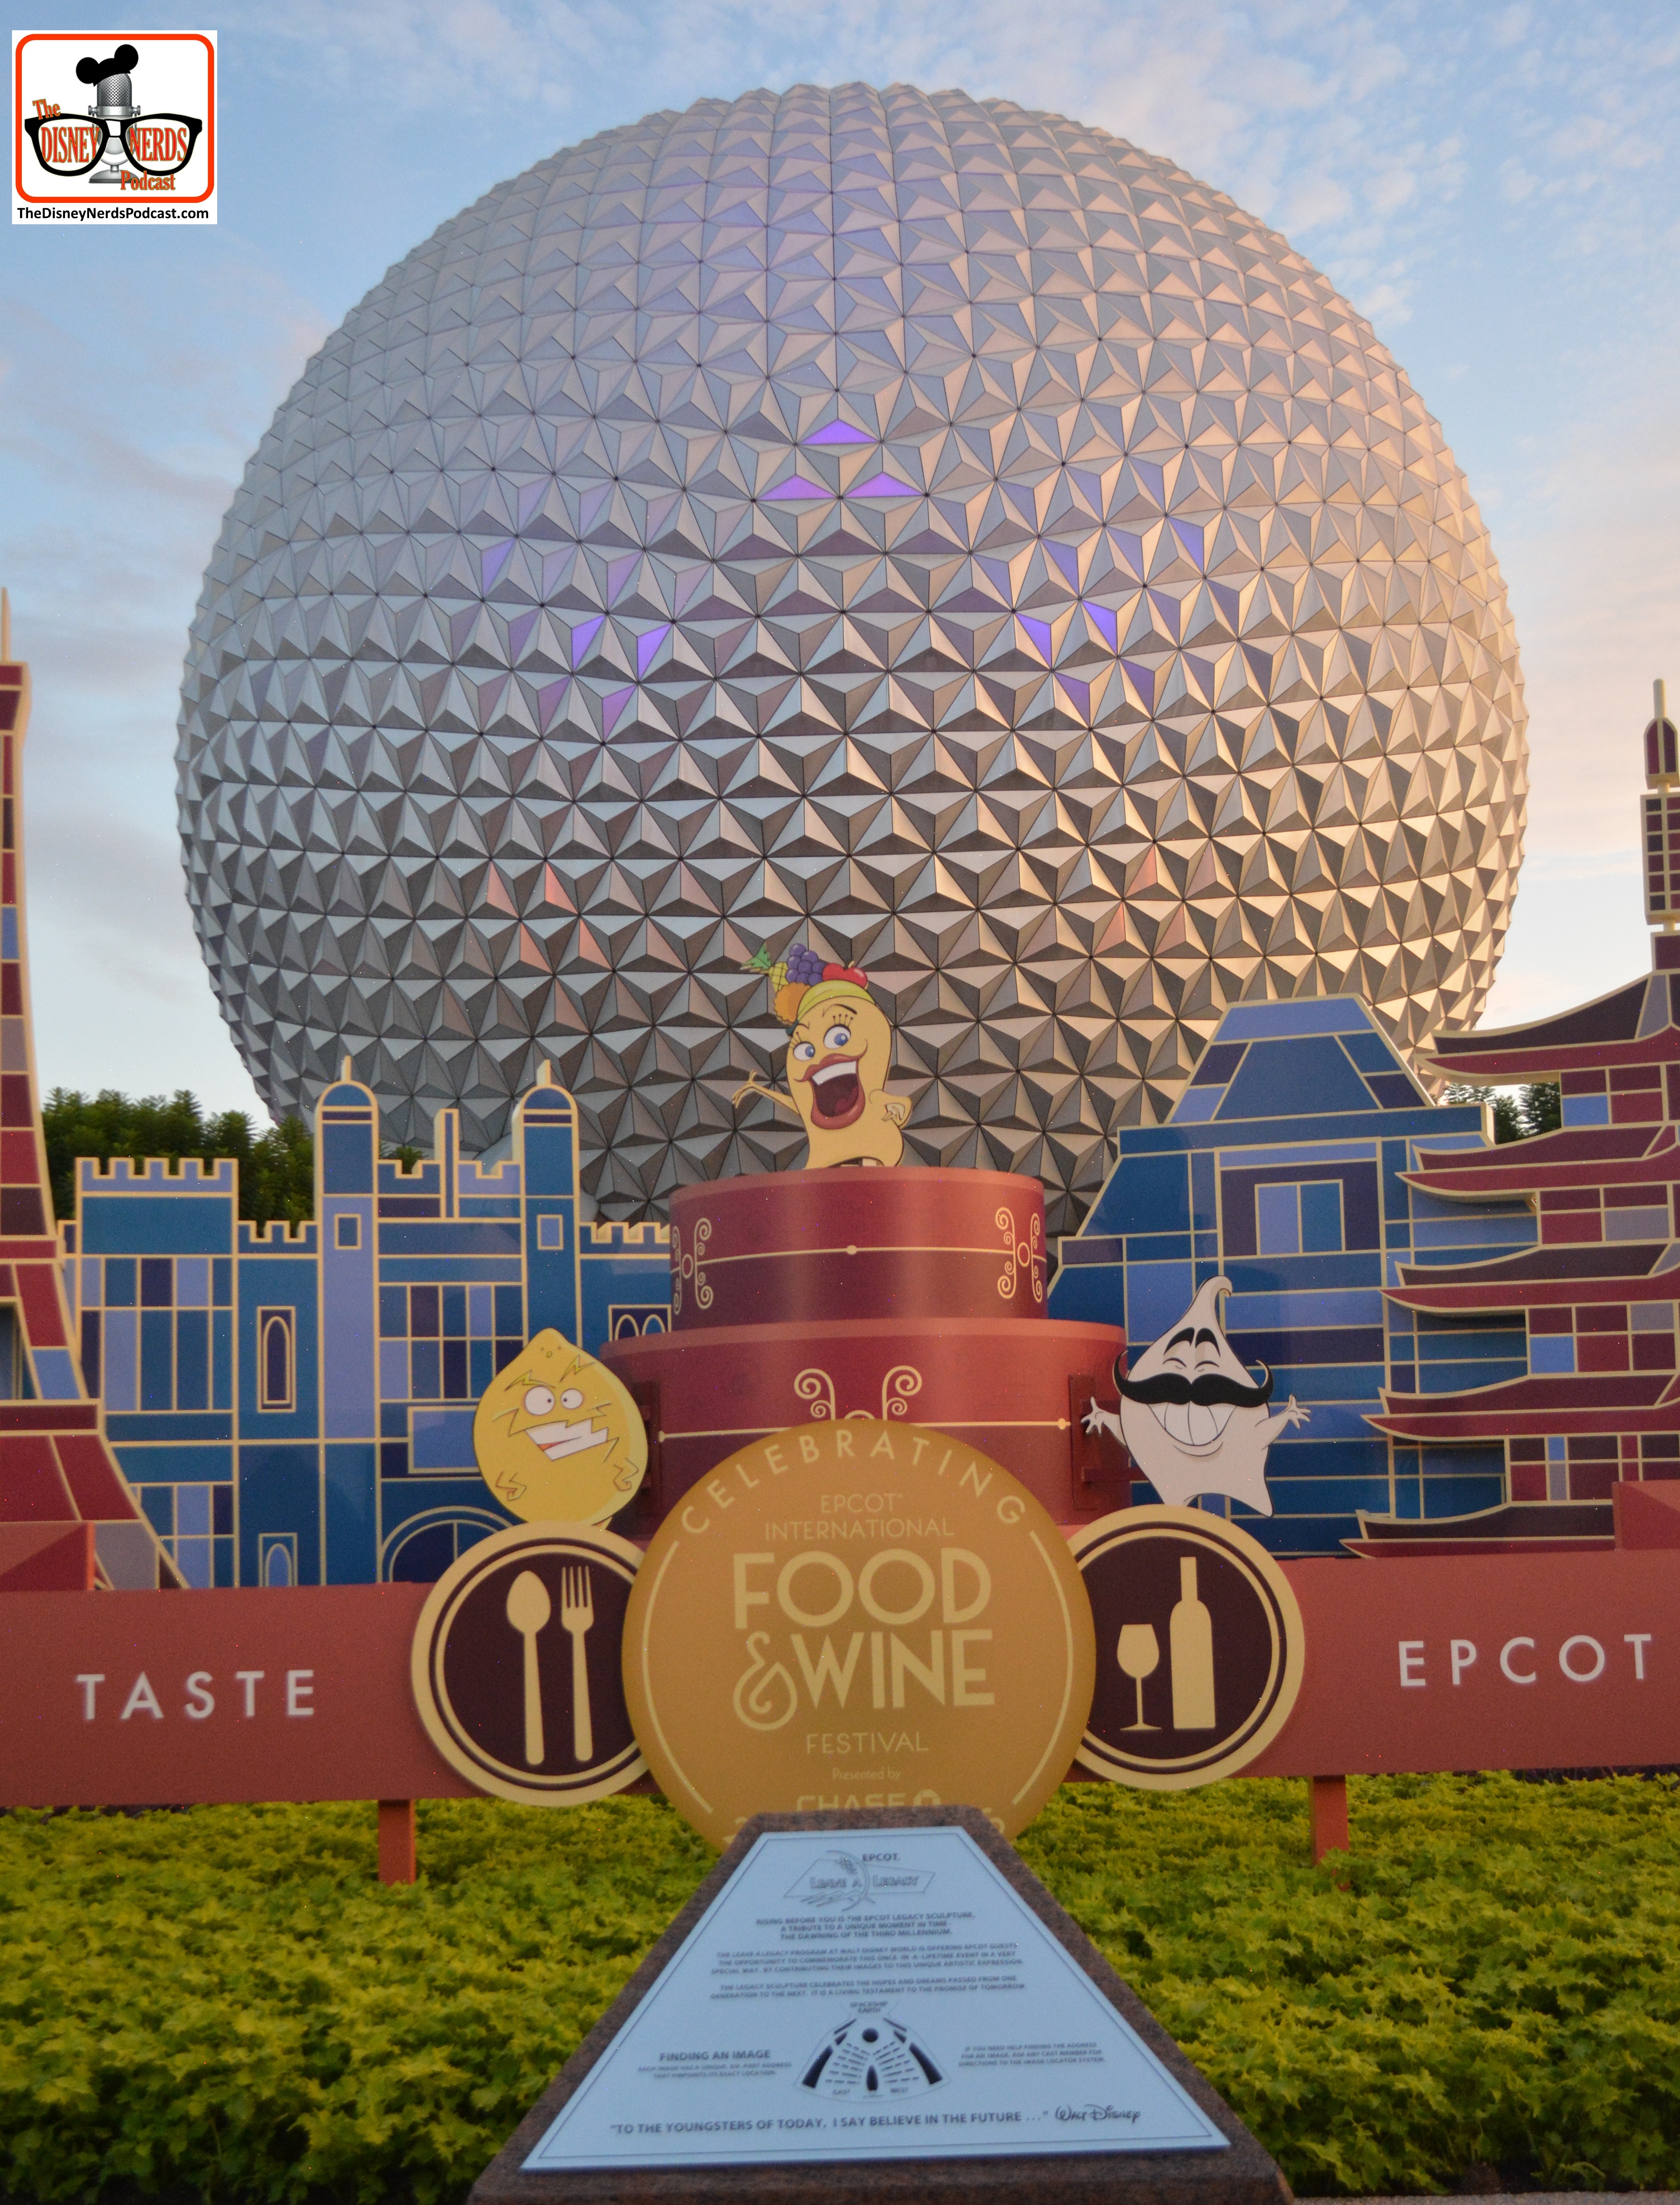 The 20th Anniversary of the Epcot International Food and Wine Festival.. "Taste Epcot" The new "Taste Buds" show up in a few places this year...